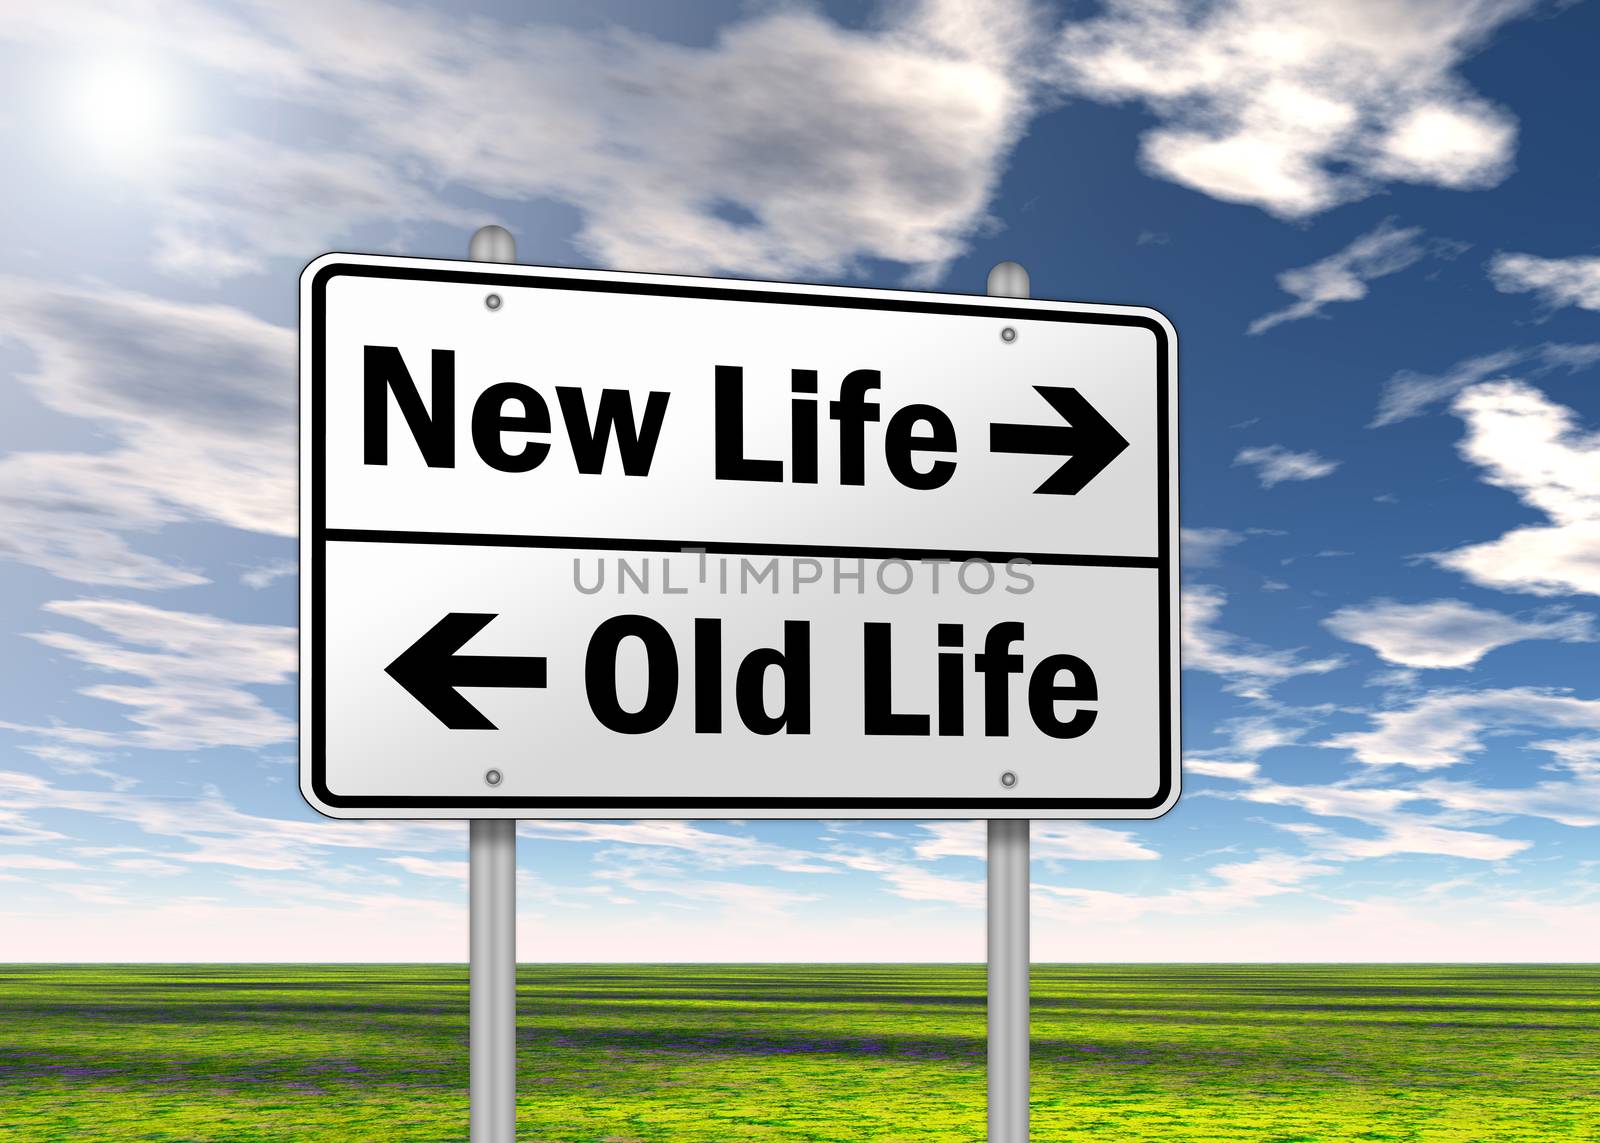 Traffic Sign "New Life vs. Old Life"